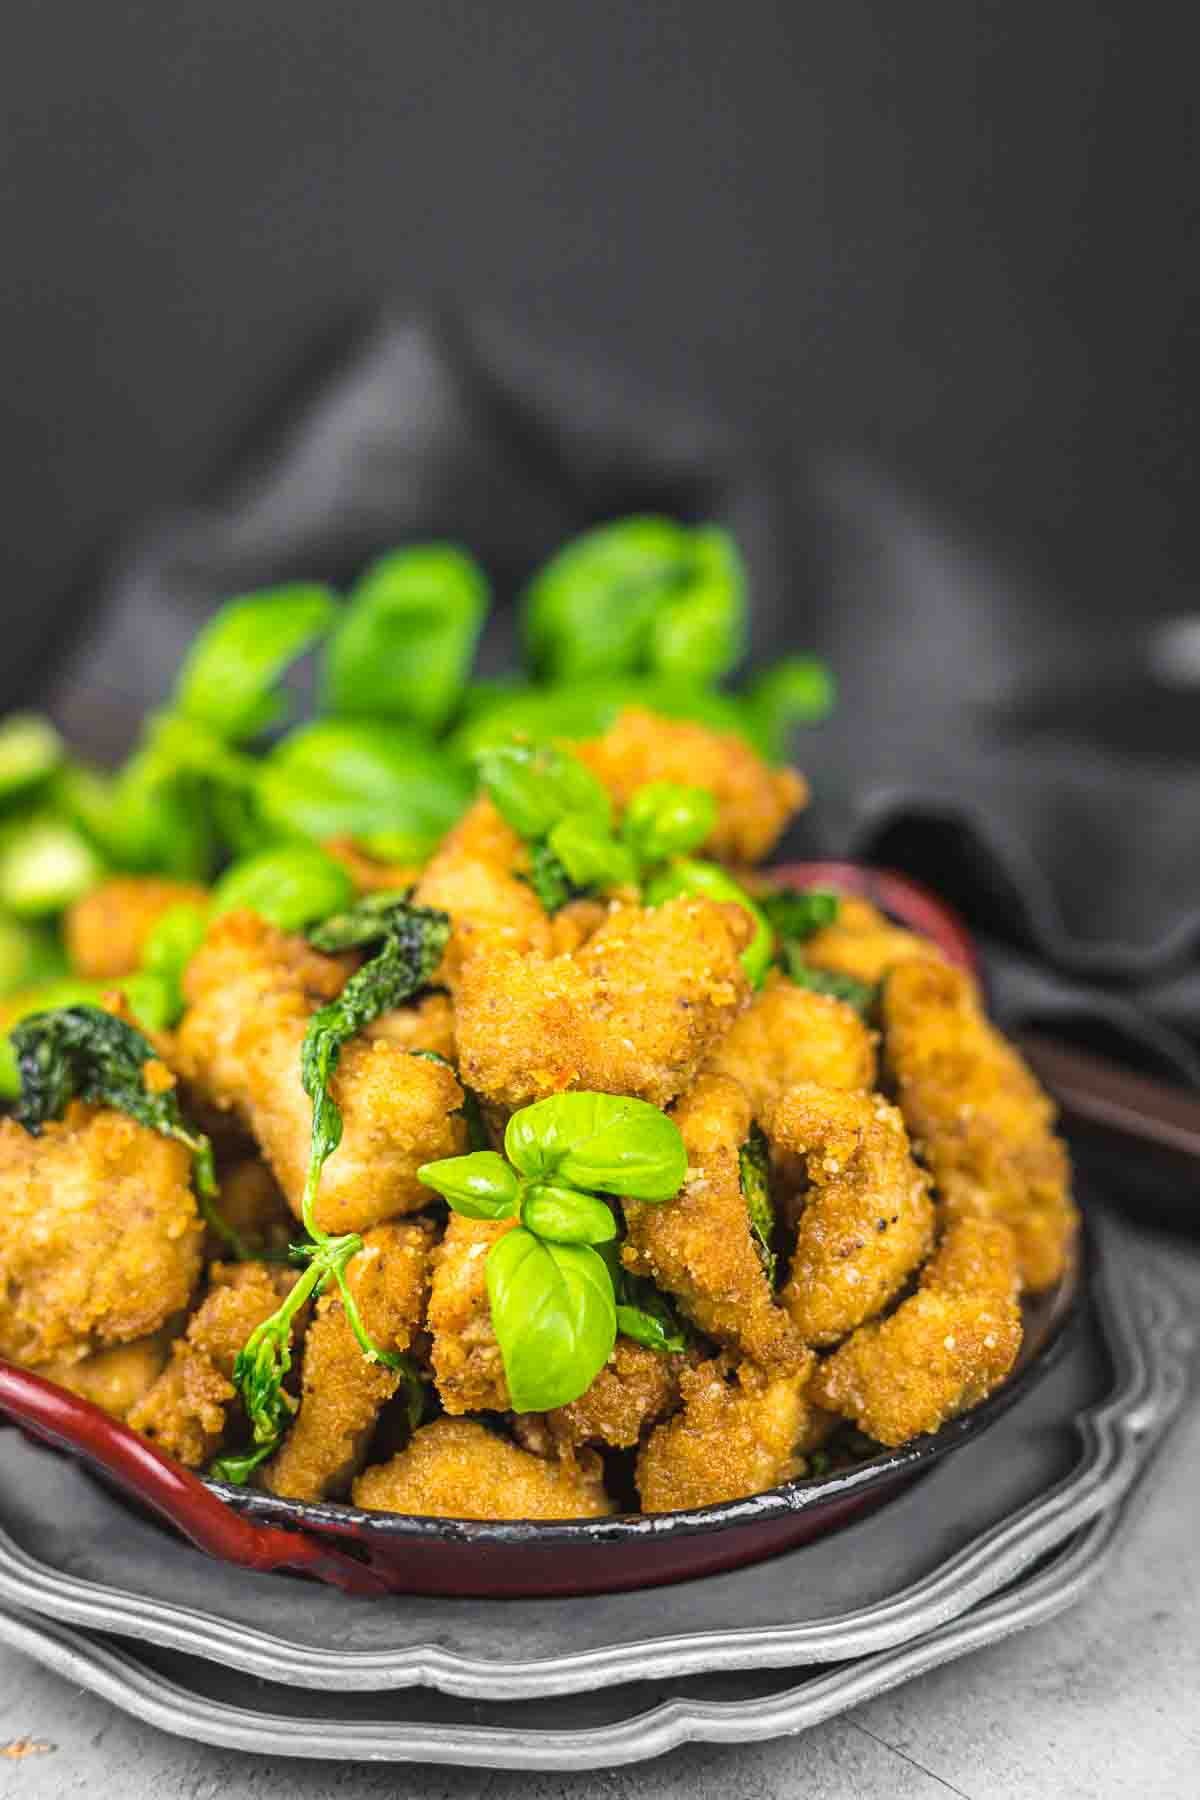 Breaded chicken pieces garnished with fresh basil in a black bowl on a gray surface.